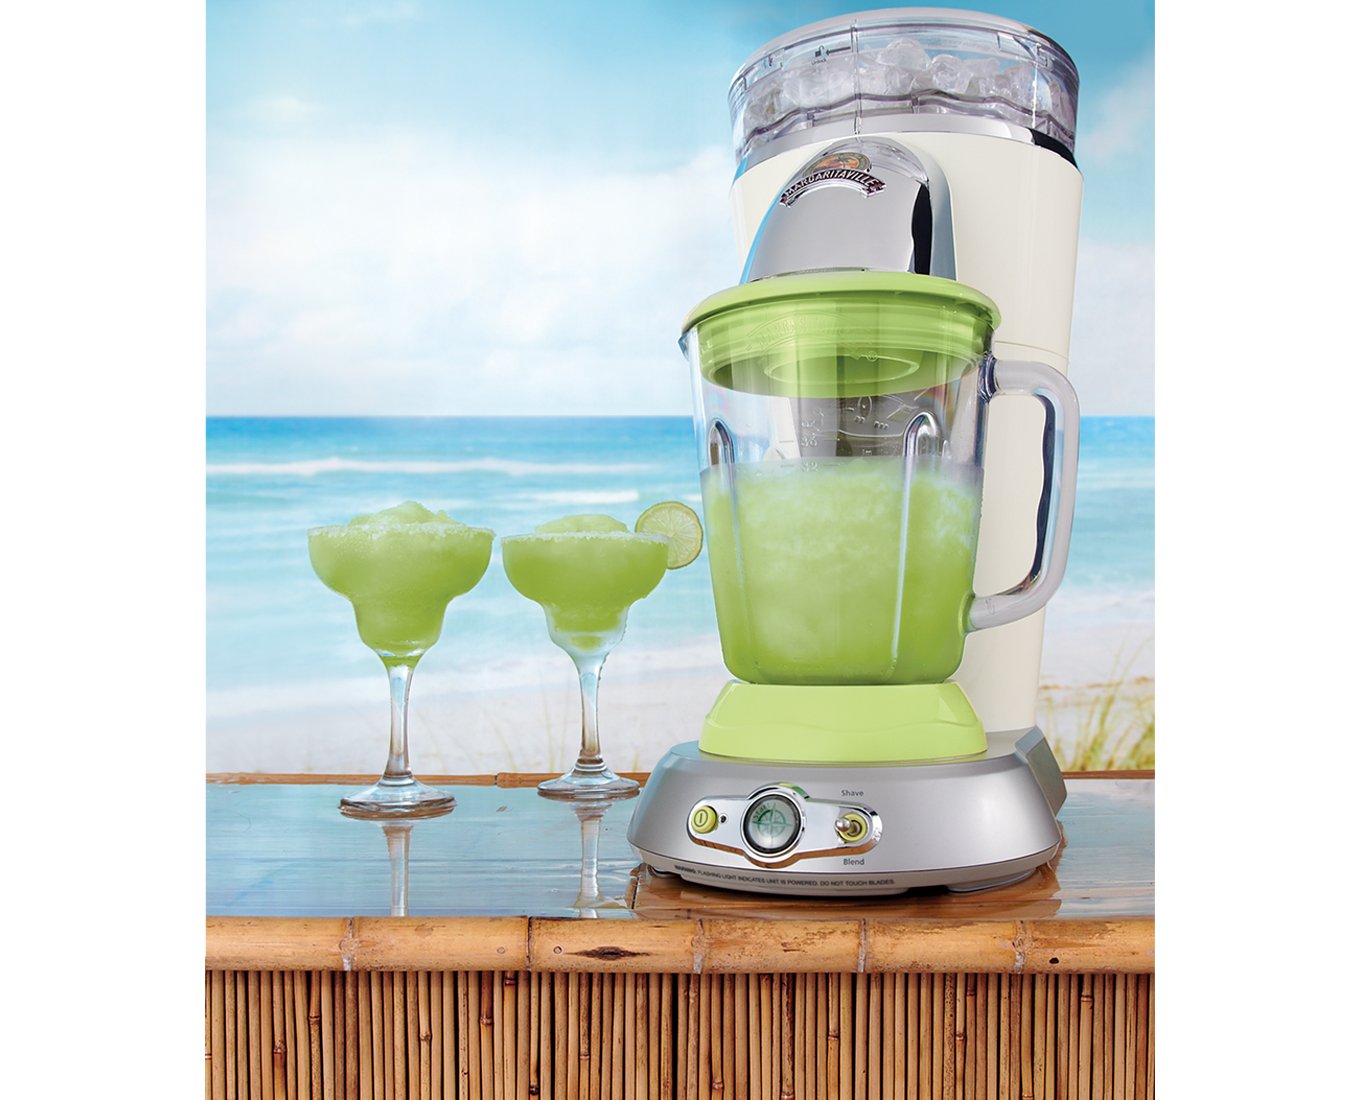 The Difference Between A Margarita Maker And A Blender or Food